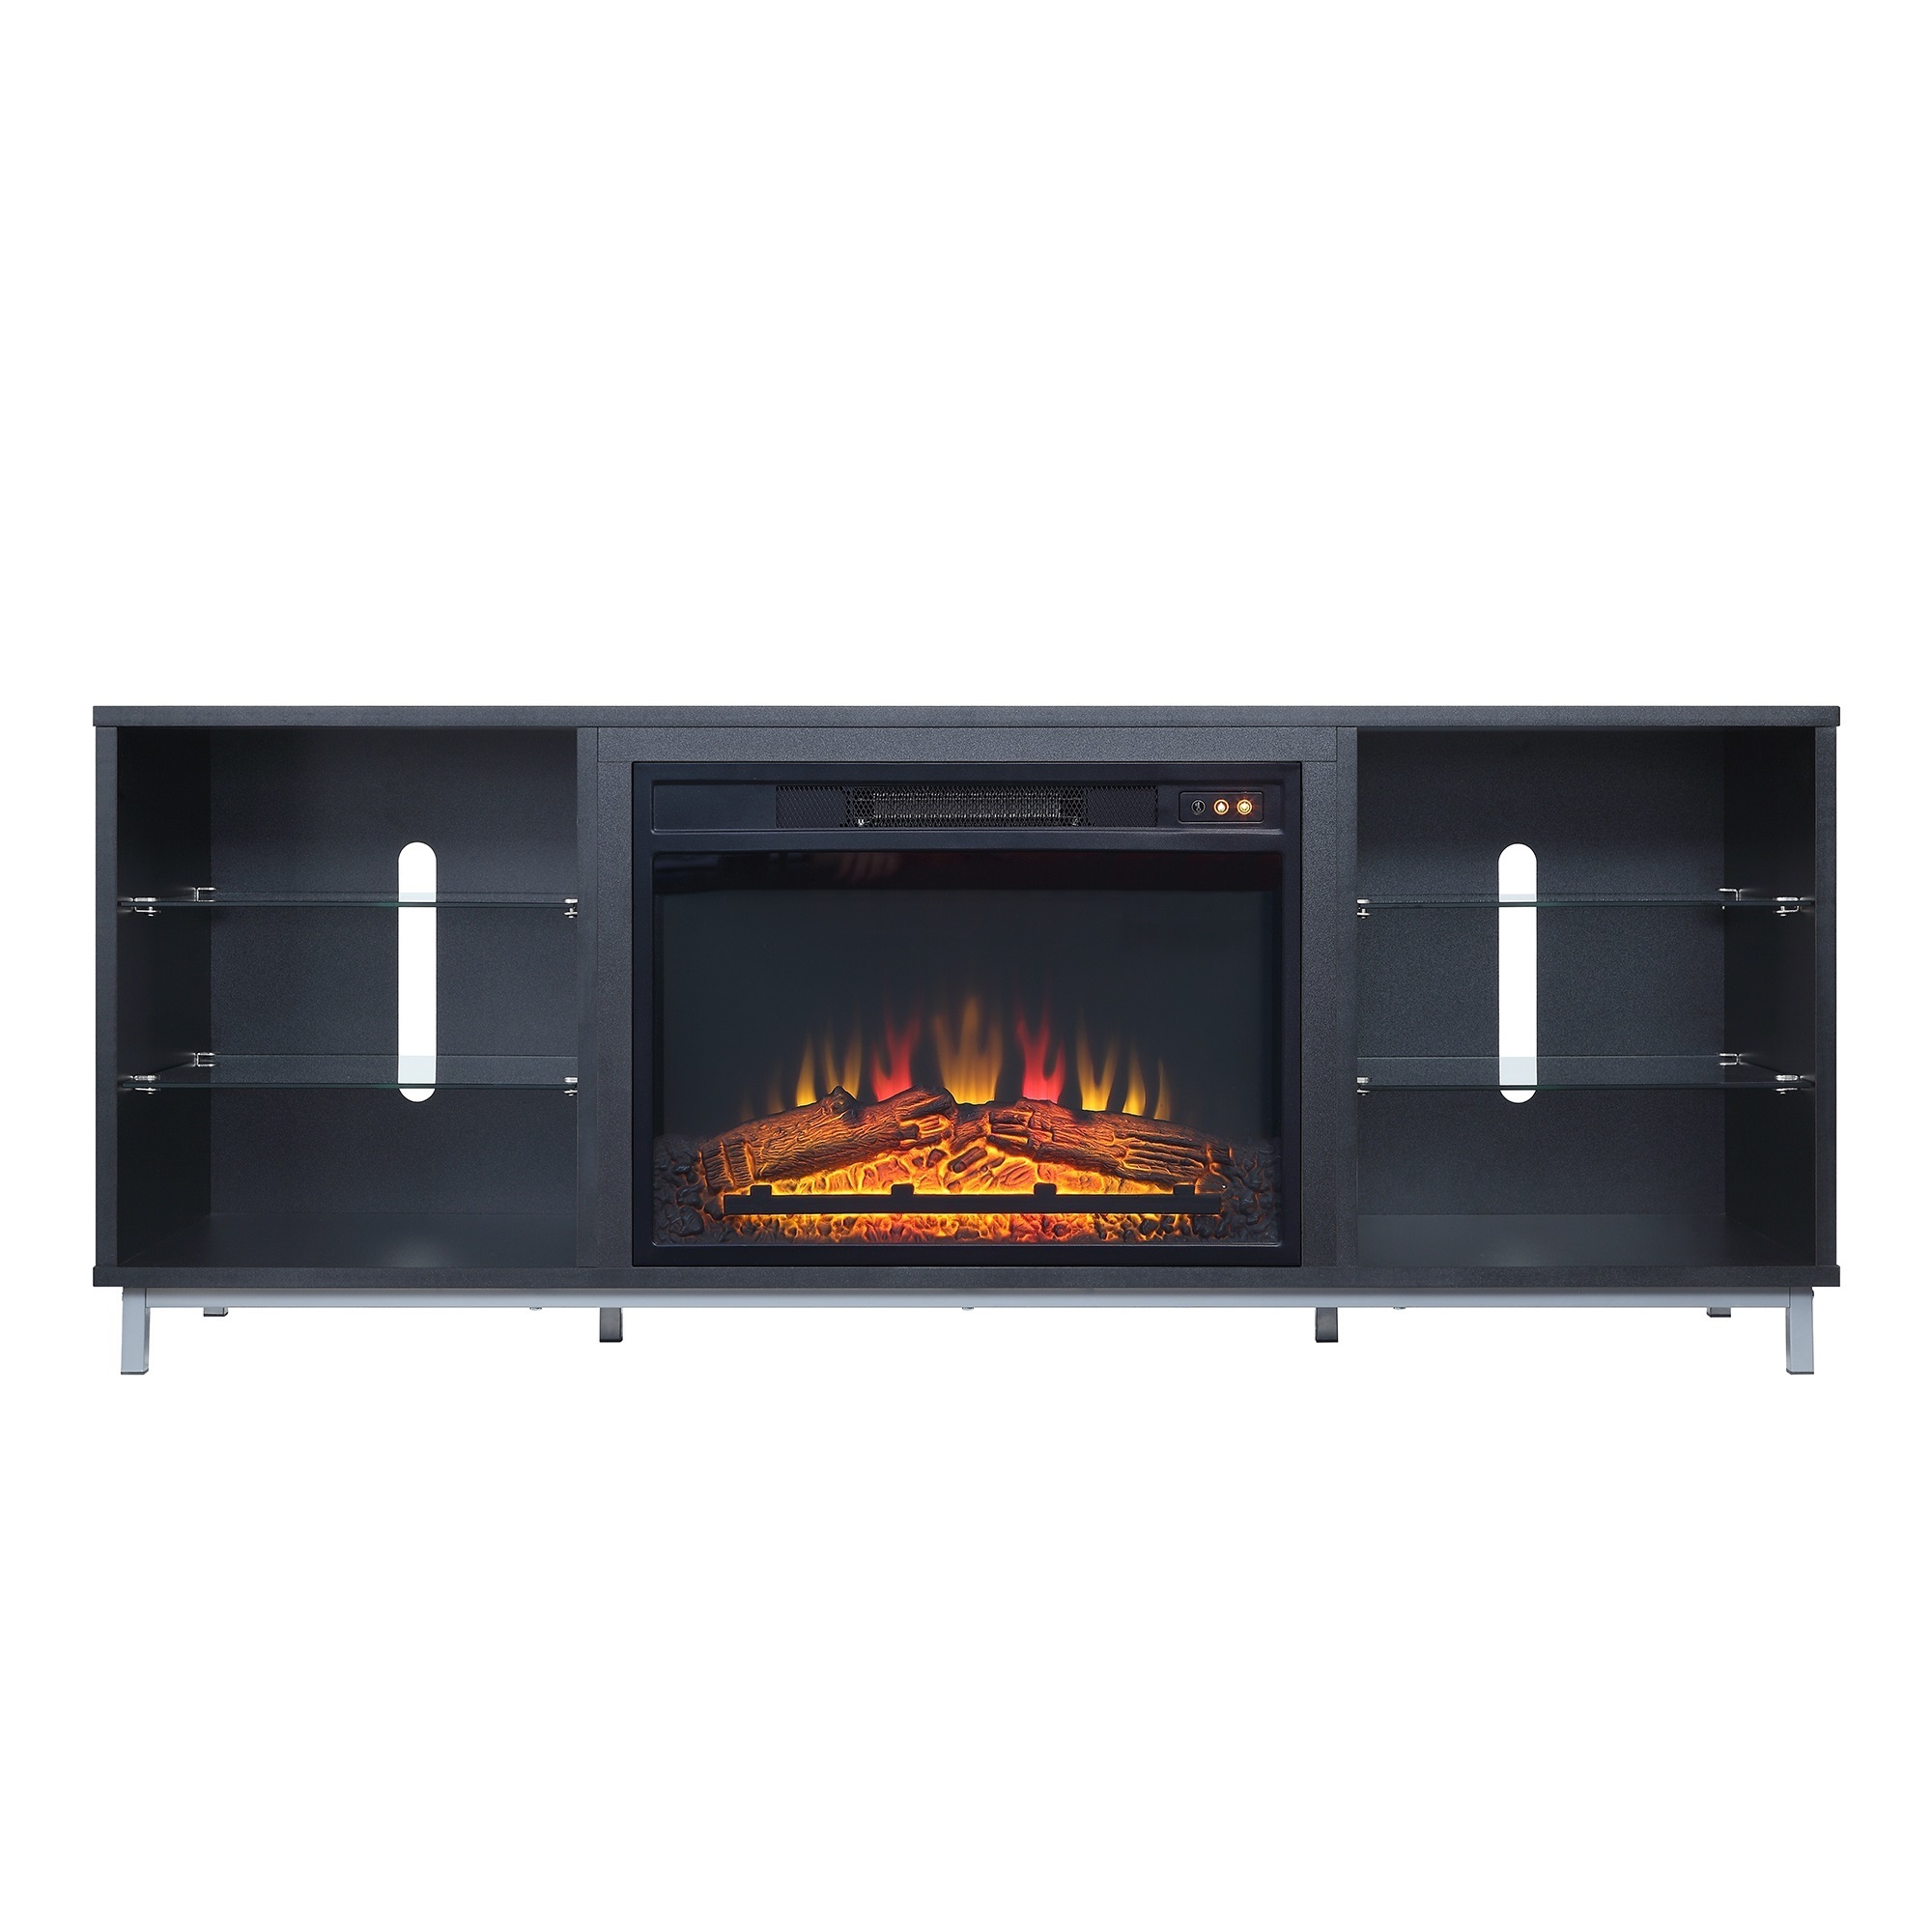 Manhattan Comfort, Brighton 60Inch Fireplace with Glass Shelves in Onyx, Width 60 in, Height 24 in, Depth 16 in, Model FP4